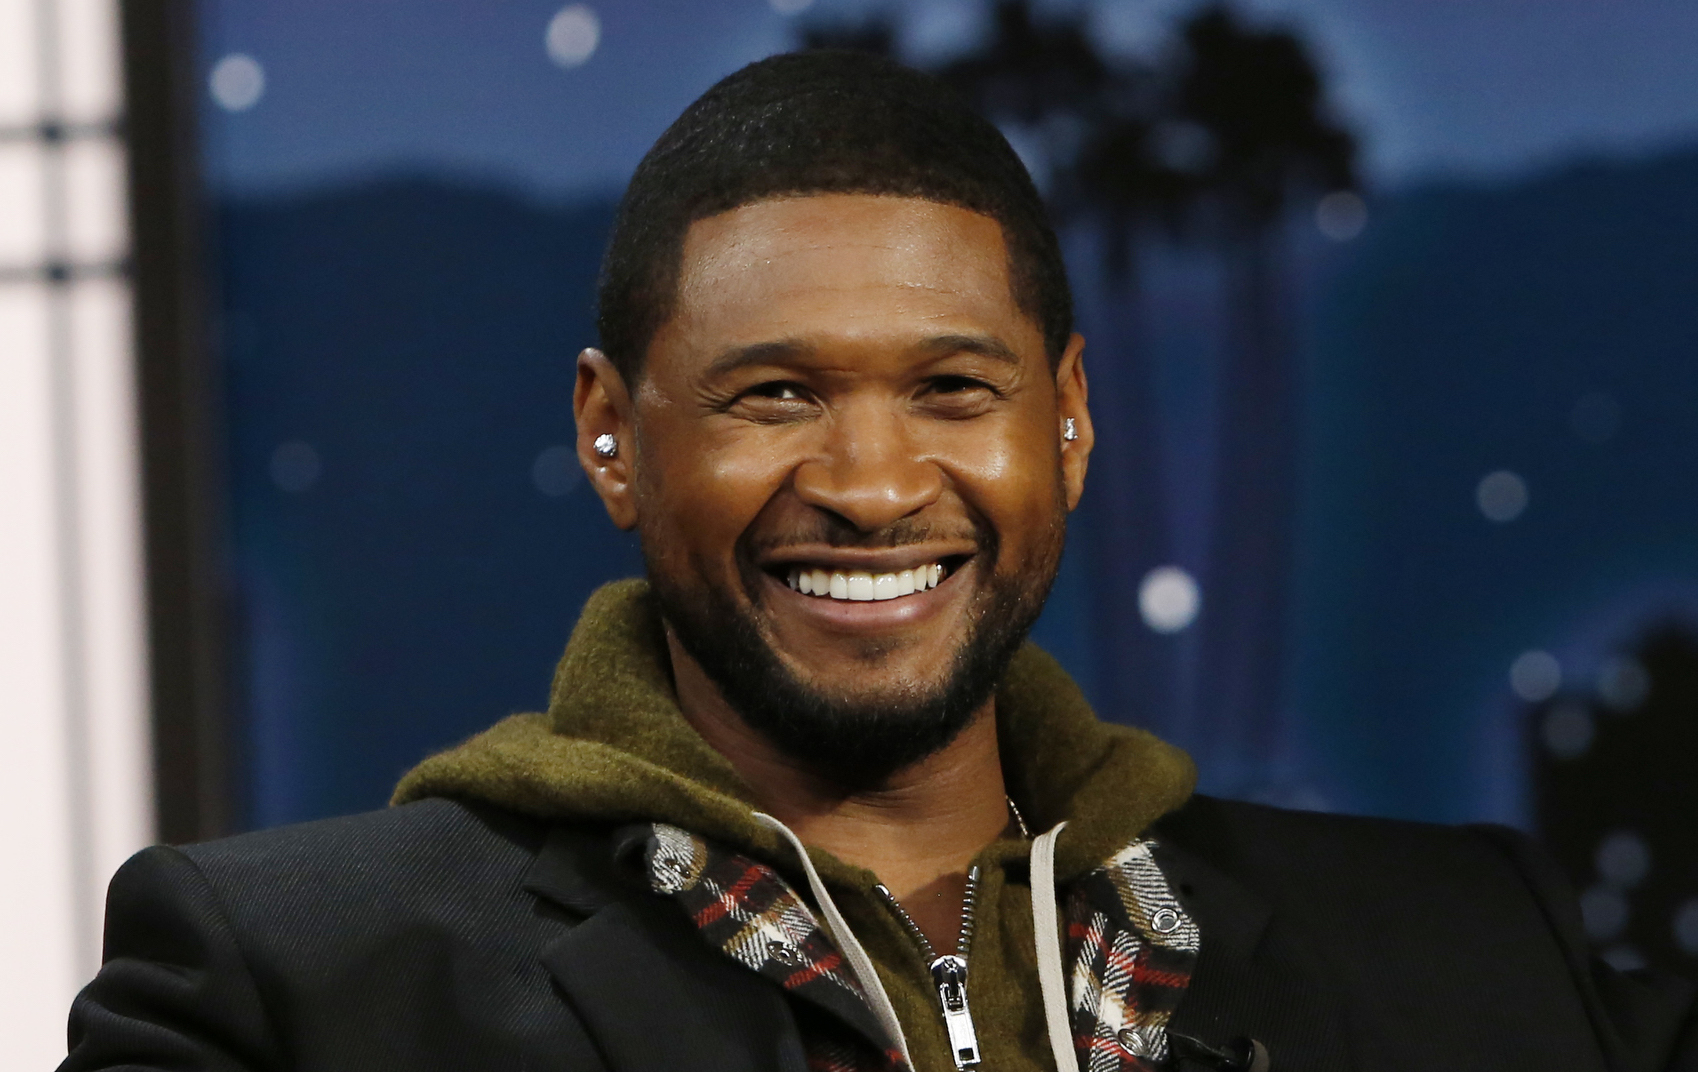 Usher’s Buzzy Tiny Desk Concert Sparks Hilarious ‘Watch This’ Memes